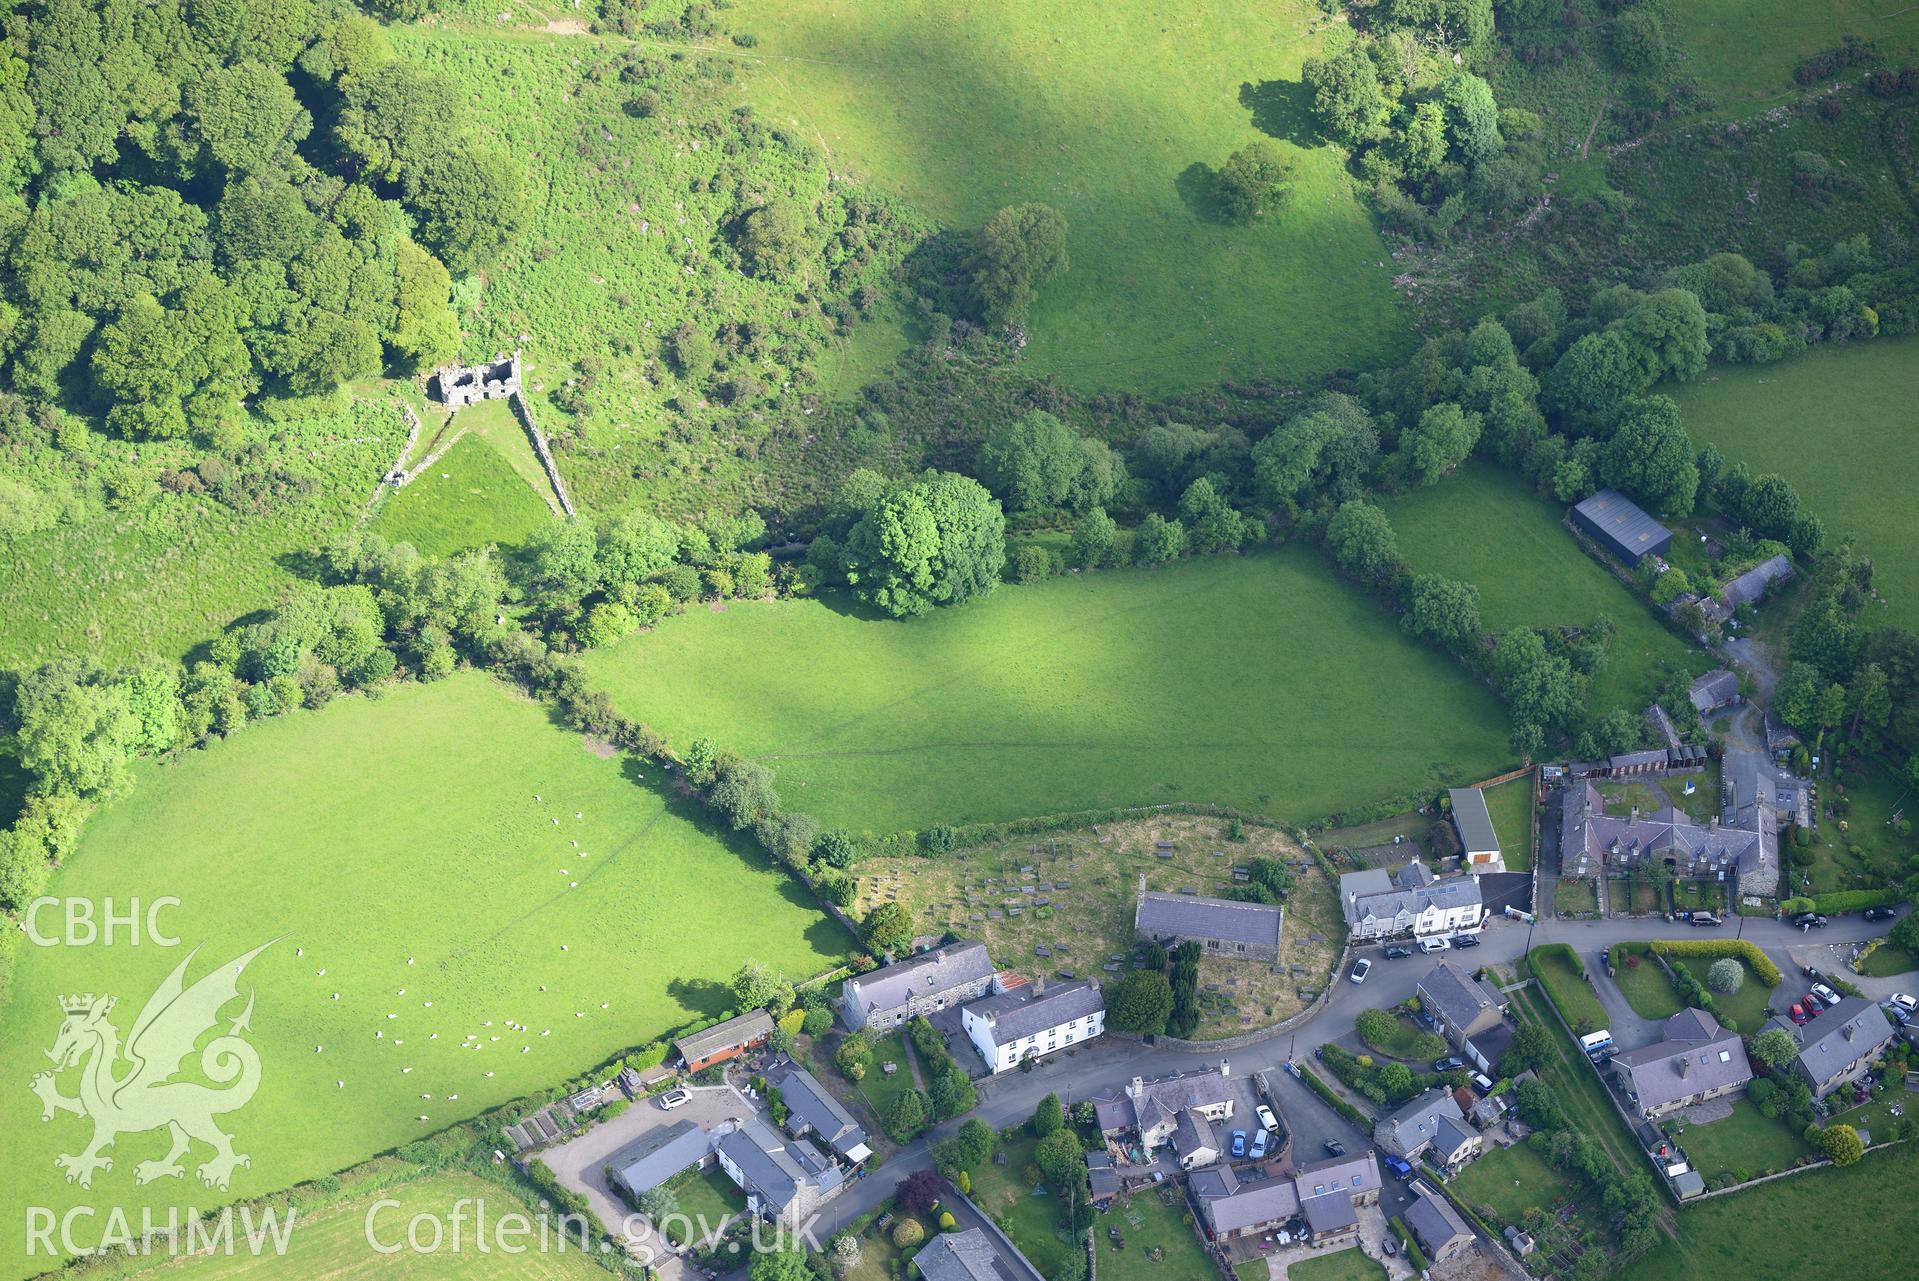 Ffynnon Gybi holy well and church, and Charles Jones' Almshouses, Llangybi, near Llanystumdwy. Oblique aerial photograph taken during the Royal Commission's programme of archaeological aerial reconnaissance by Toby Driver on 23rd June 2015.